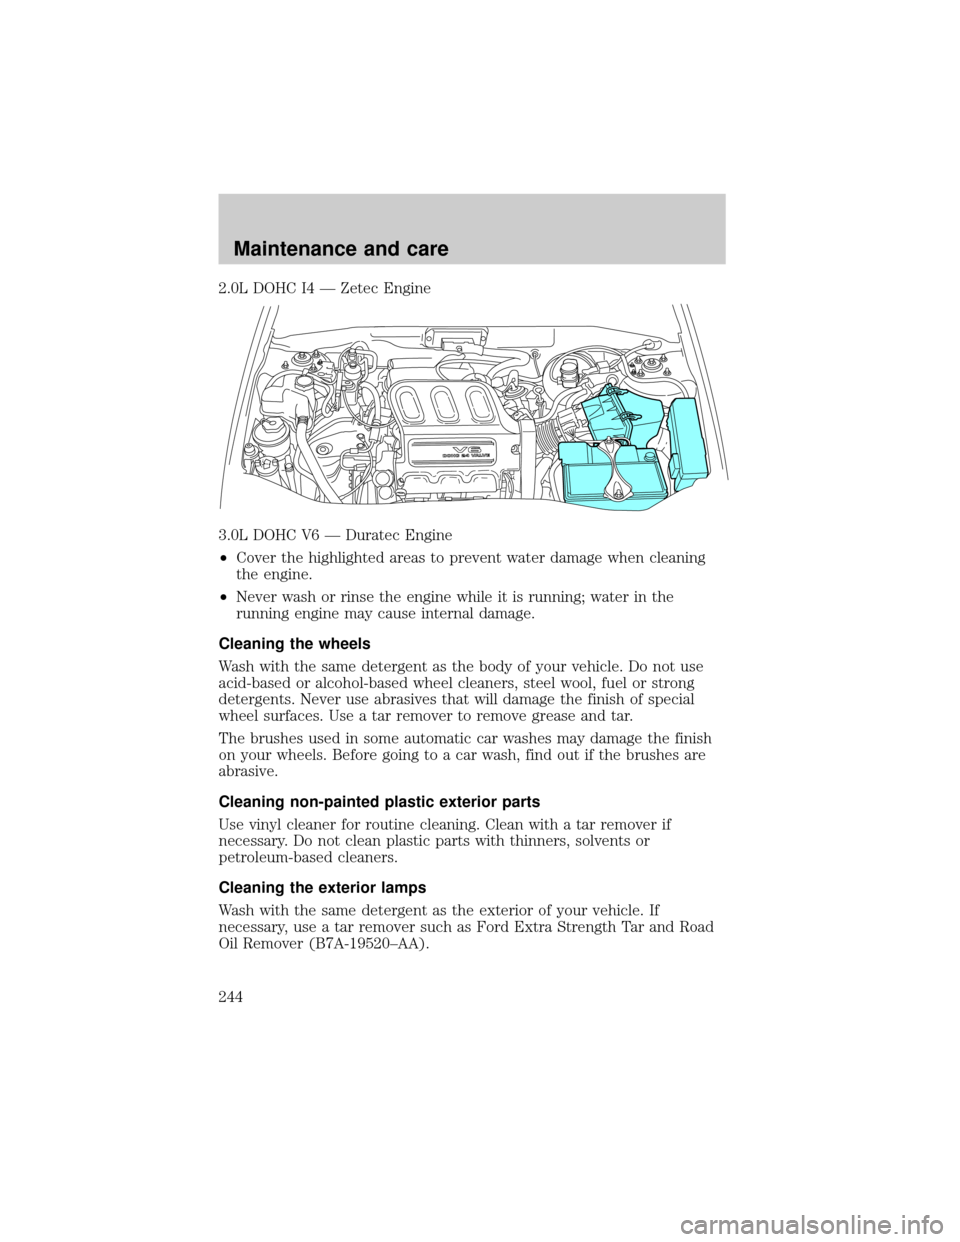 FORD ESCAPE 2001 1.G Owners Manual 2.0L DOHC I4 Ð Zetec Engine
3.0L DOHC V6 Ð Duratec Engine
²Cover the highlighted areas to prevent water damage when cleaning
the engine.
²Never wash or rinse the engine while it is running; water 